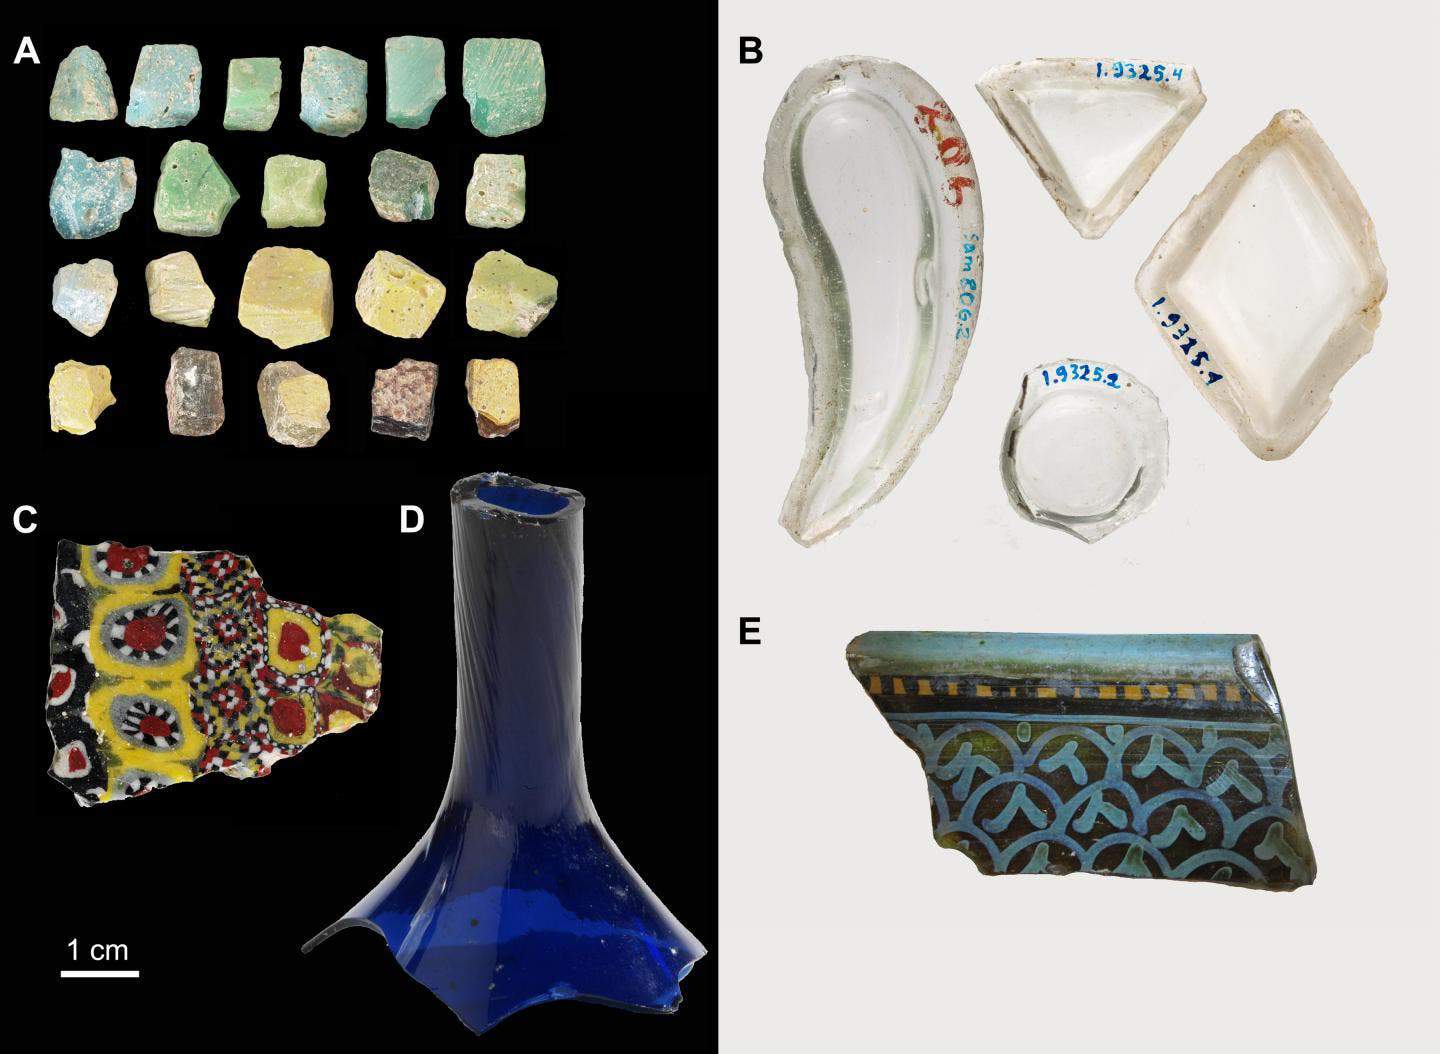 The glass fragments used in this study. Image credits: Images A, C and D from the Victoria and Albert Museum, London [http://collections.vam.ac.uk]; images B and E from the Museum für islamische Kunst / Staatliche Museen zu Berlin [www.smb-digital.de/eMuseumPlus].